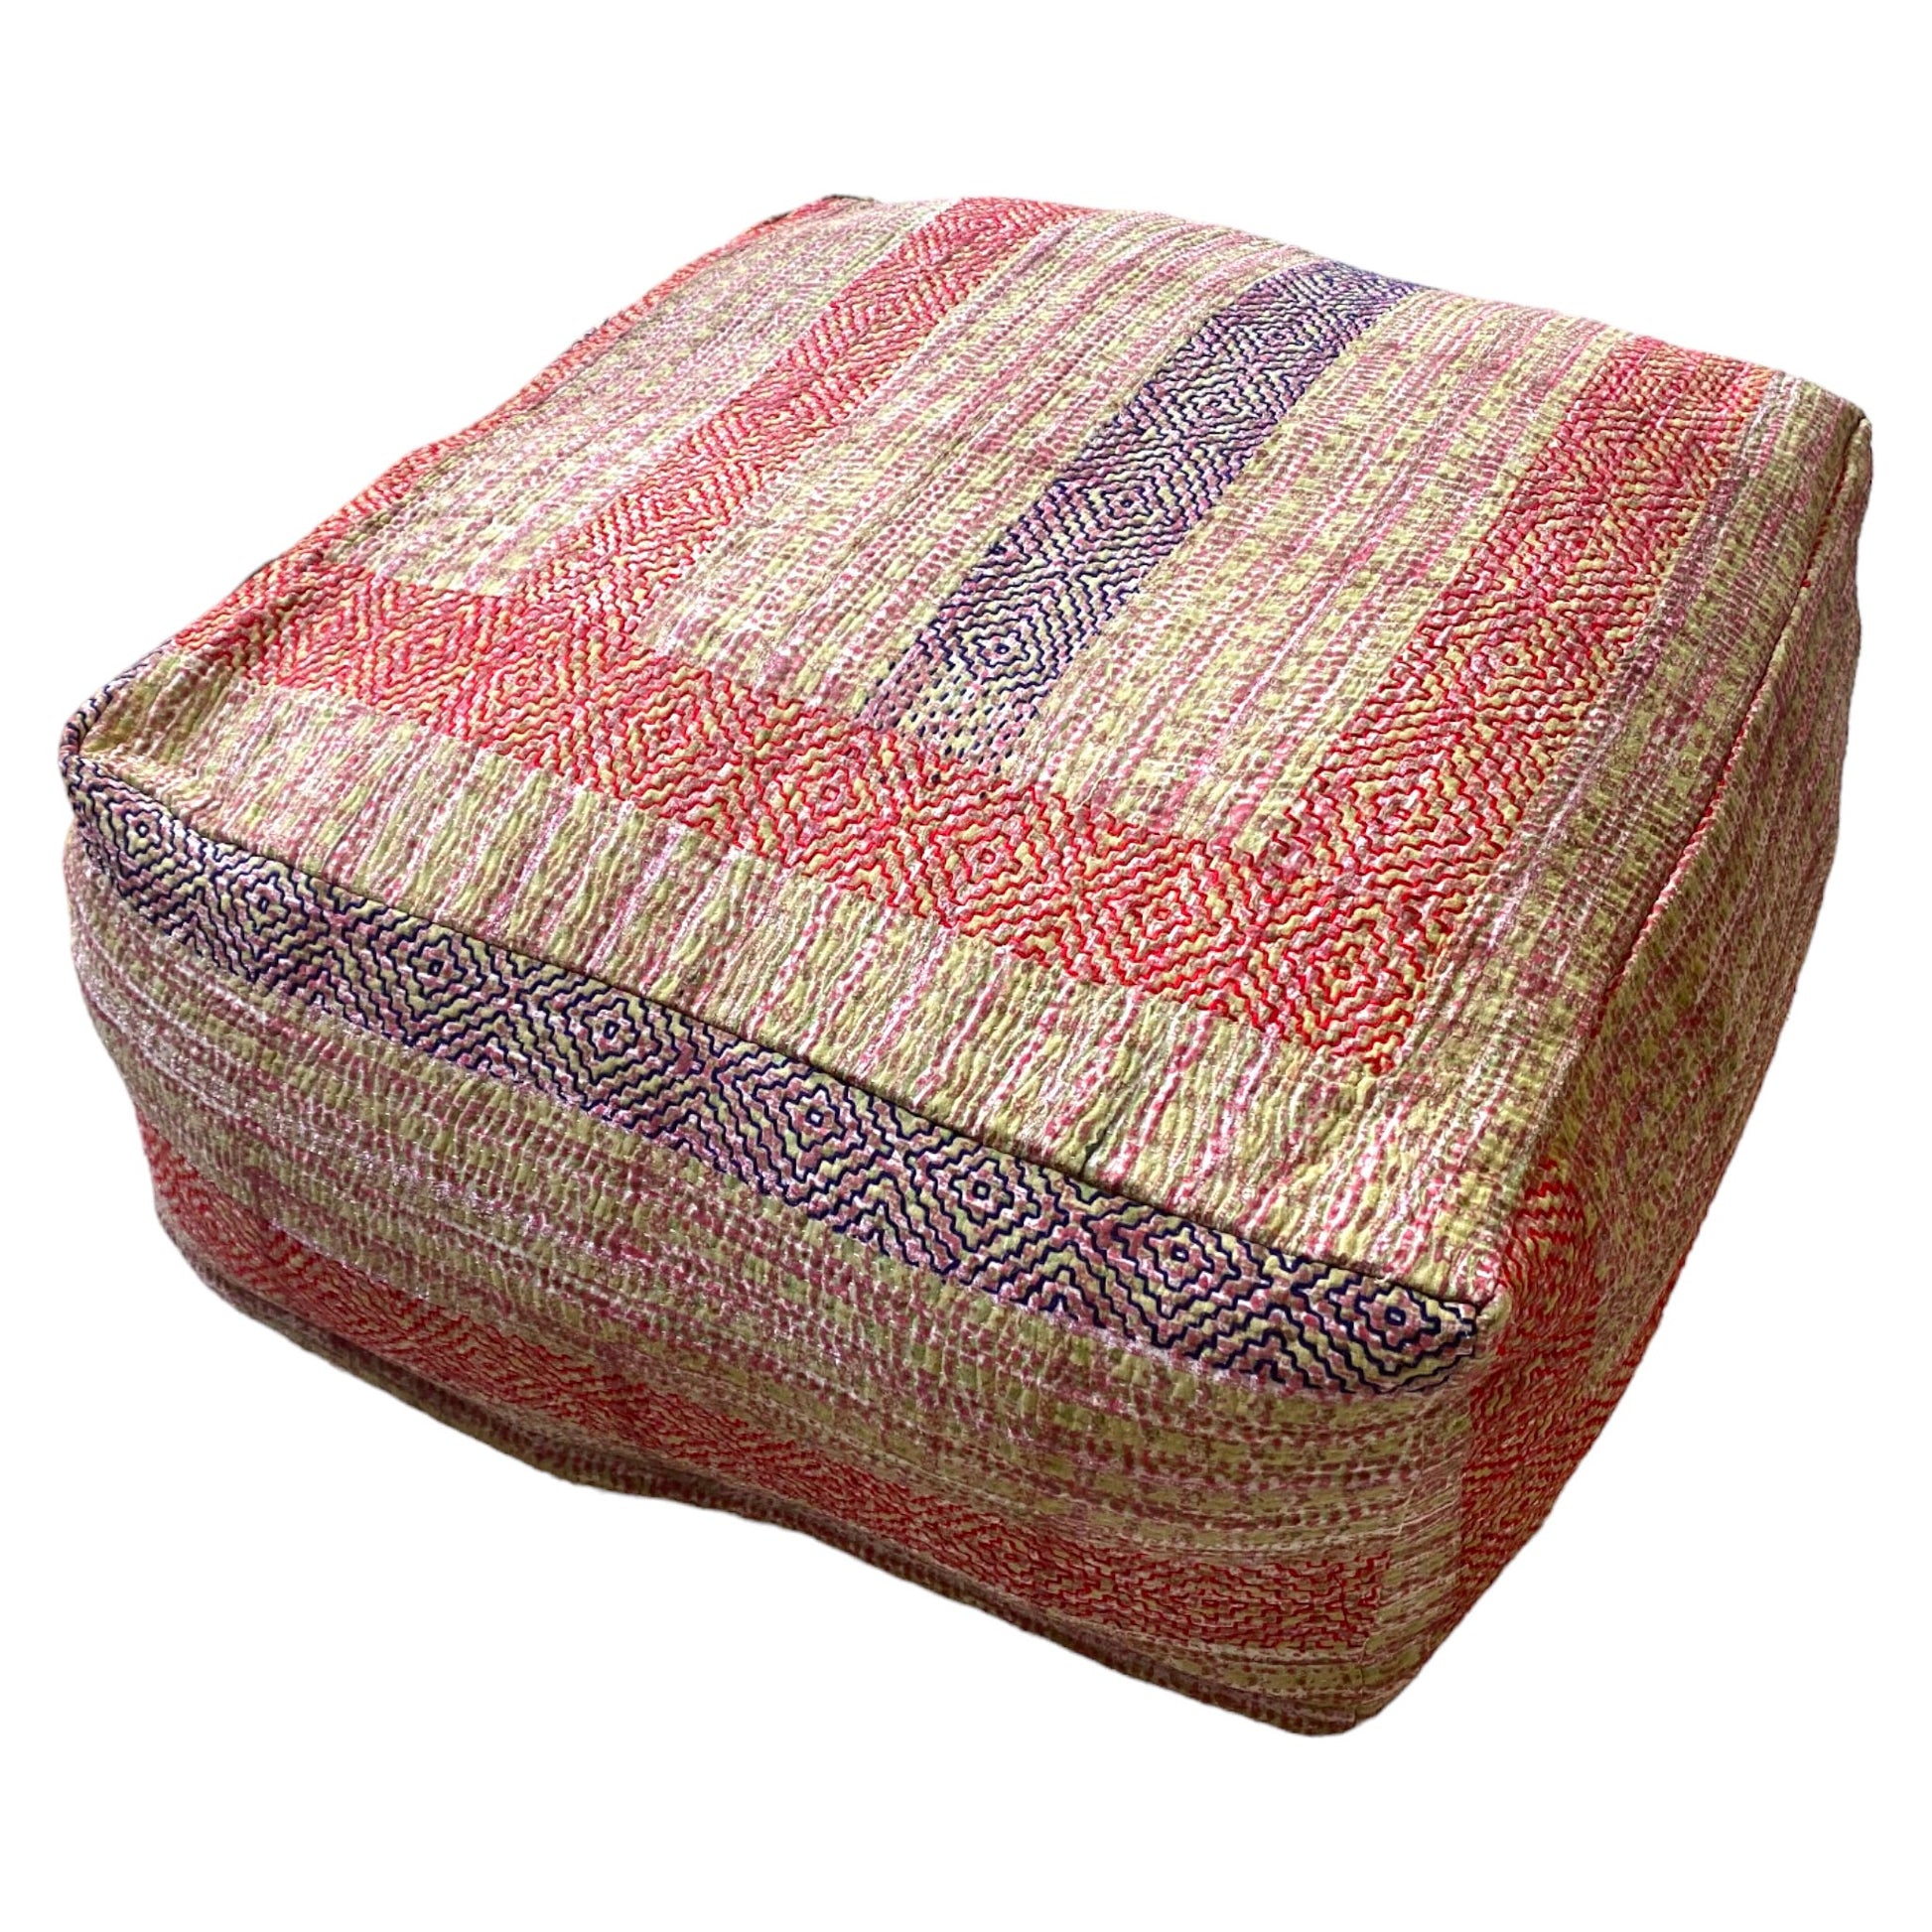 Red and blue Kantha cushion floor